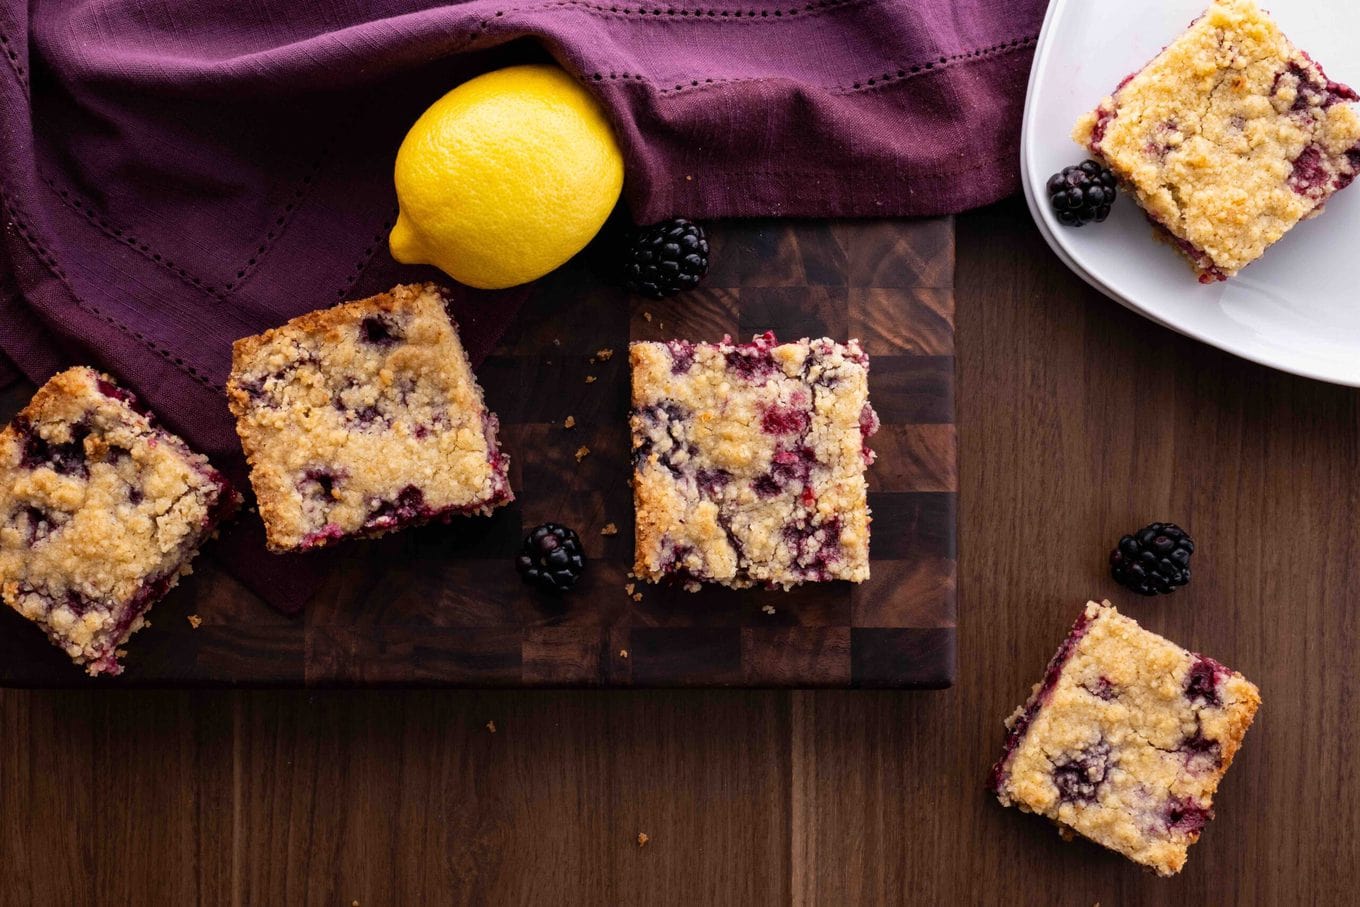 Blackberry Crumb Bars slices on board and plate with lemon and blackberries